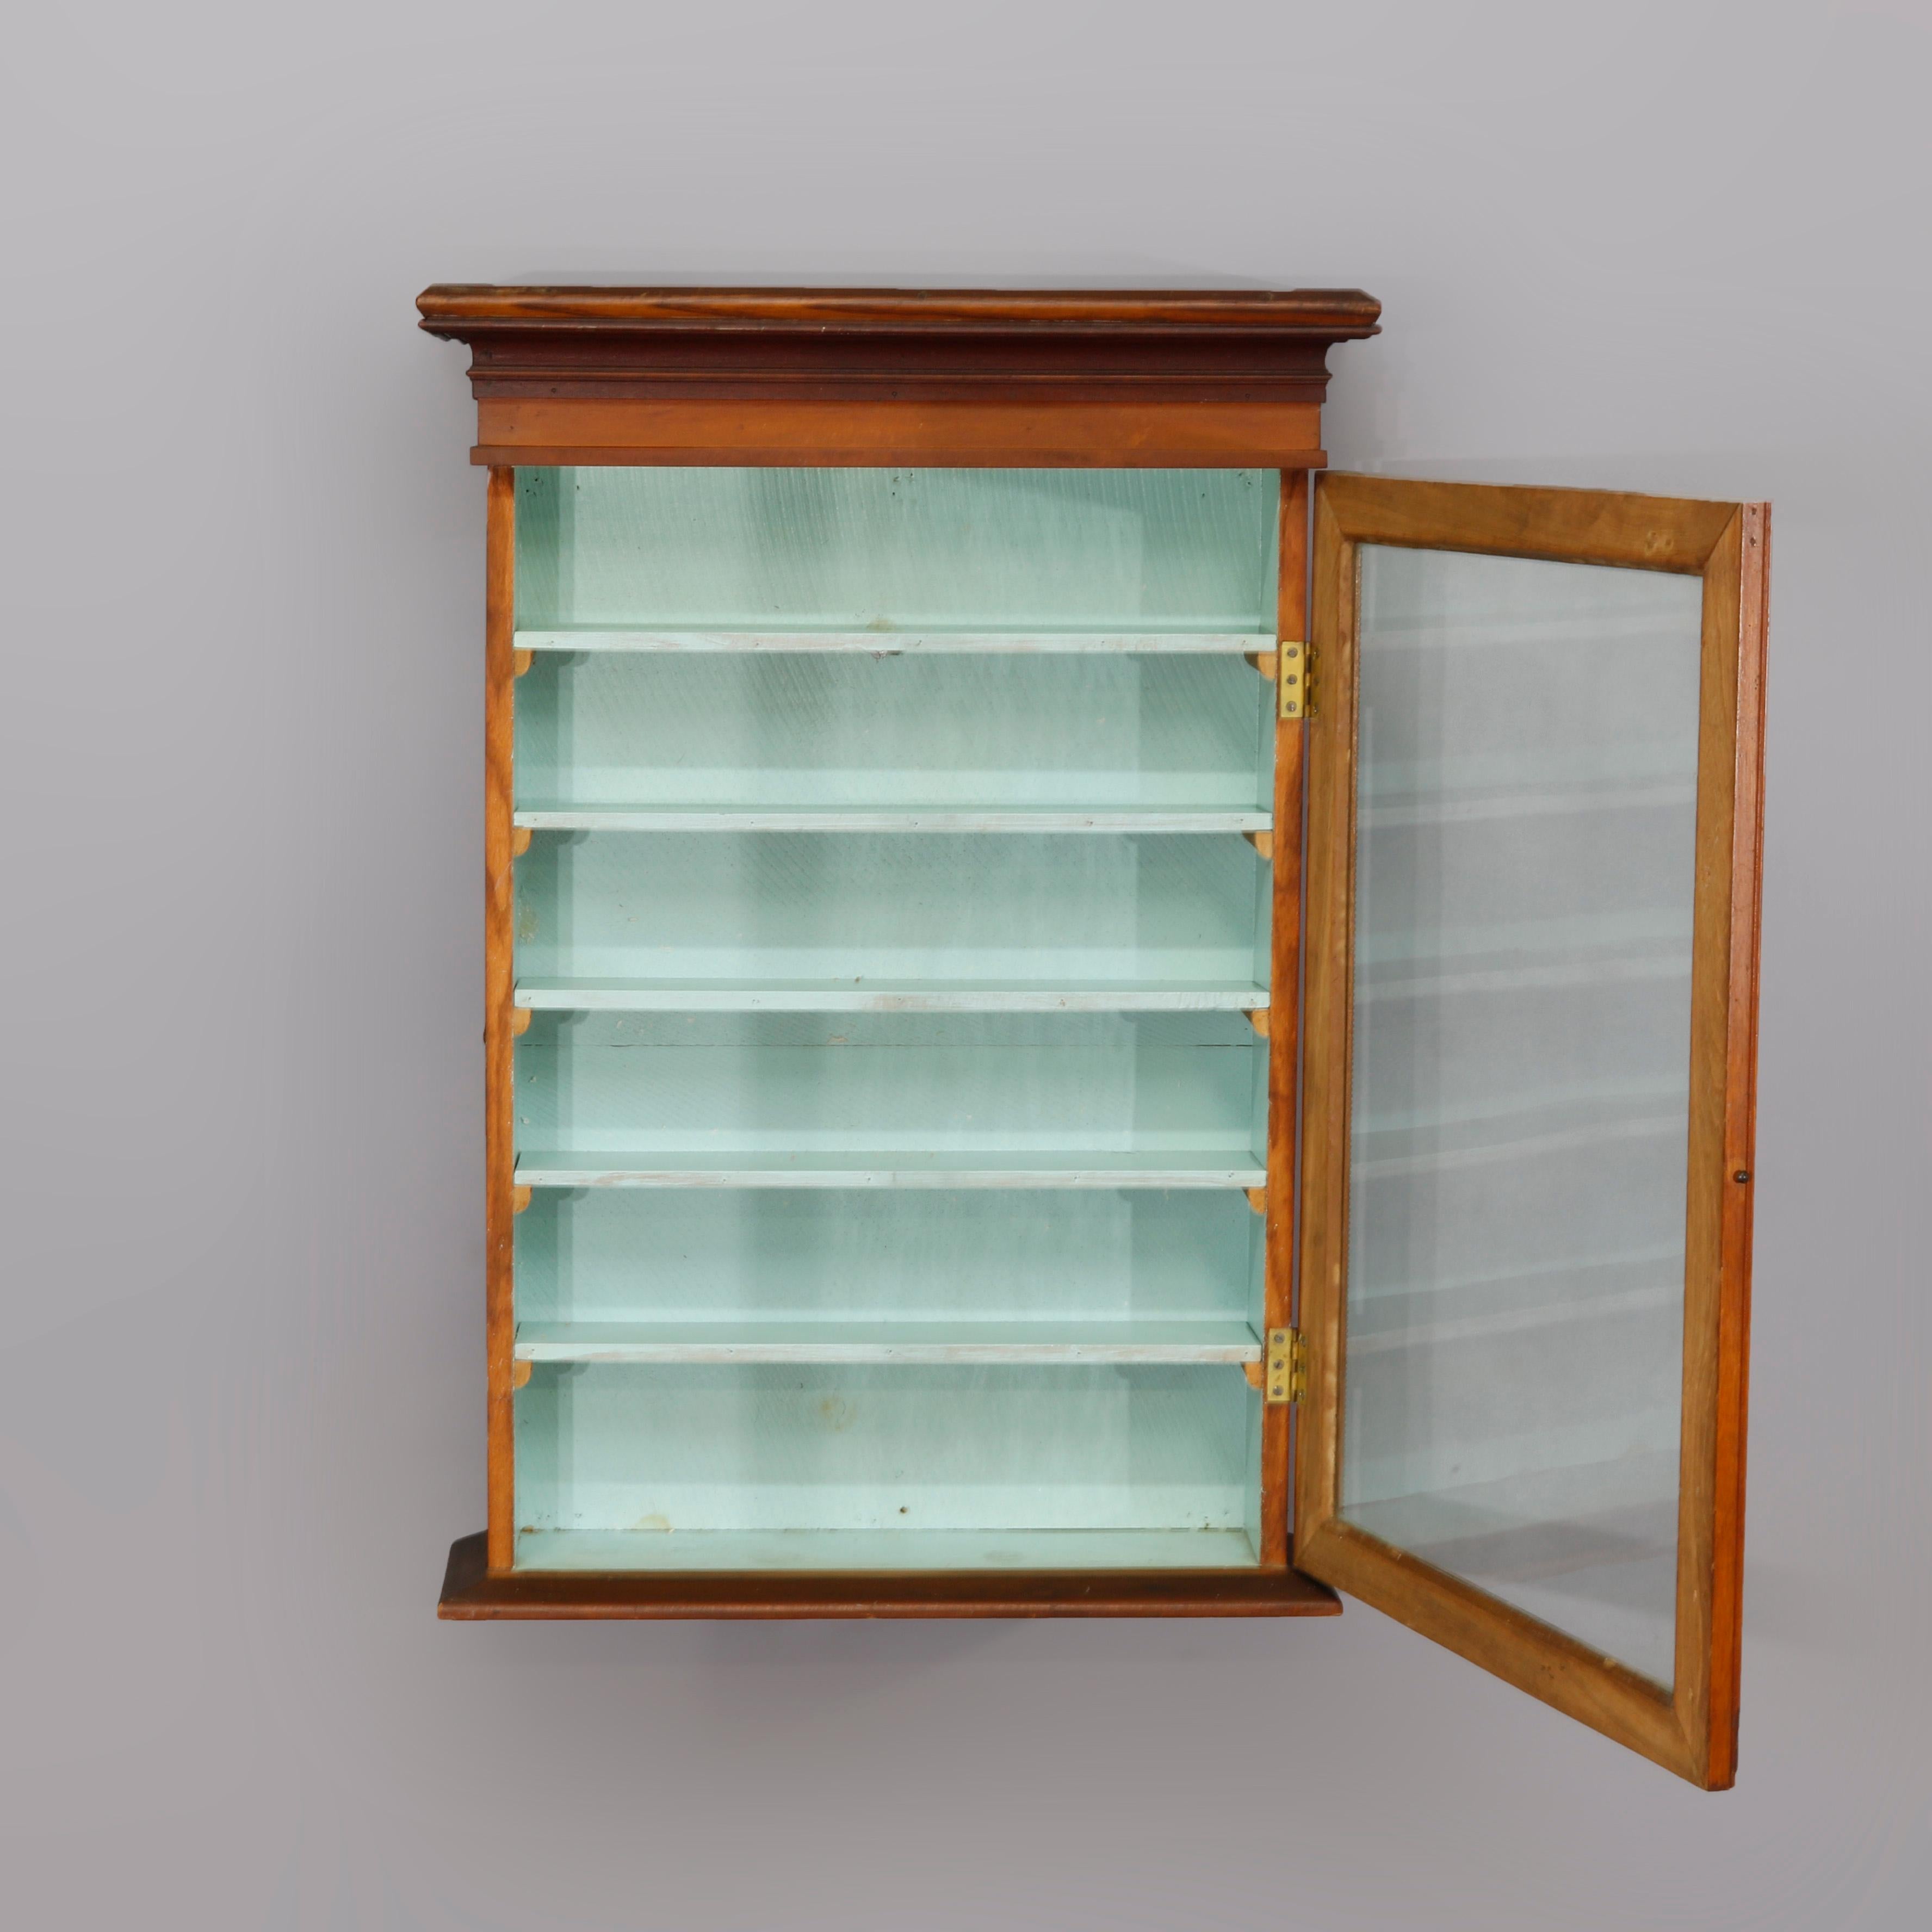 An antique hanging display wall cabinet offers mahogany and oak construction with glass door opening to shelved interior, circa 1900

Measures: 35.13